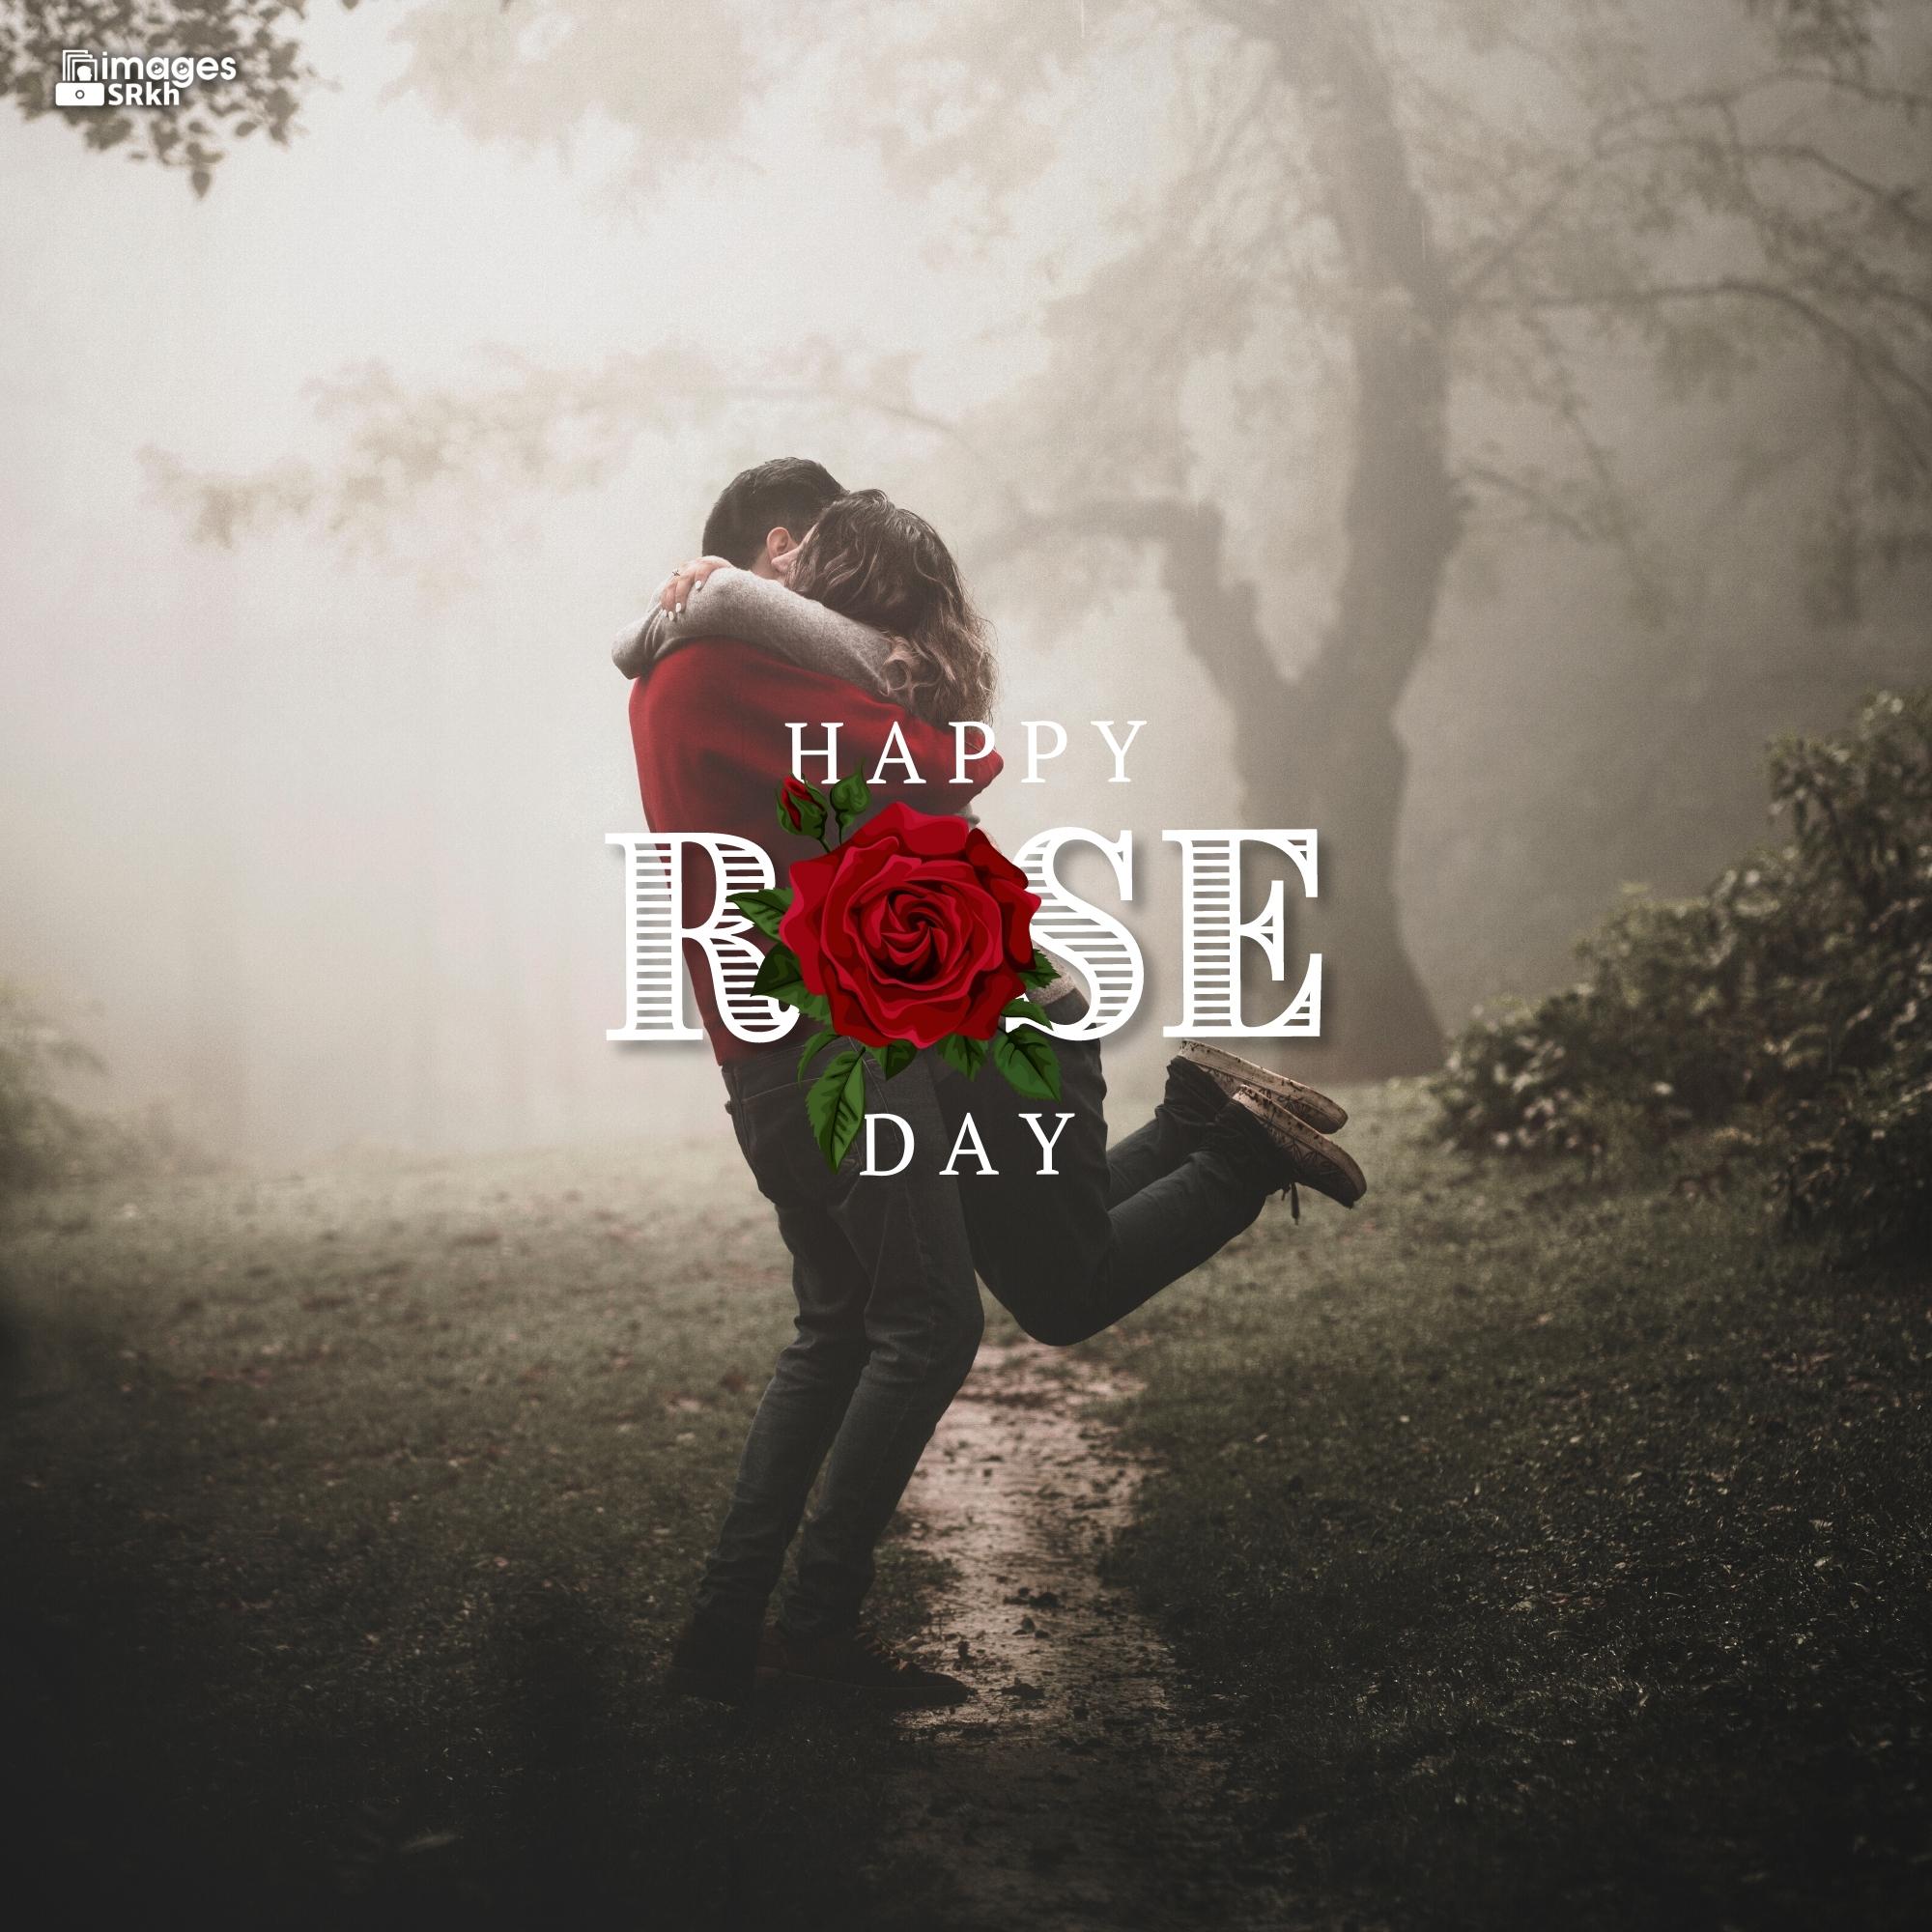 Romantic Rose Day Images Hd Download (16)